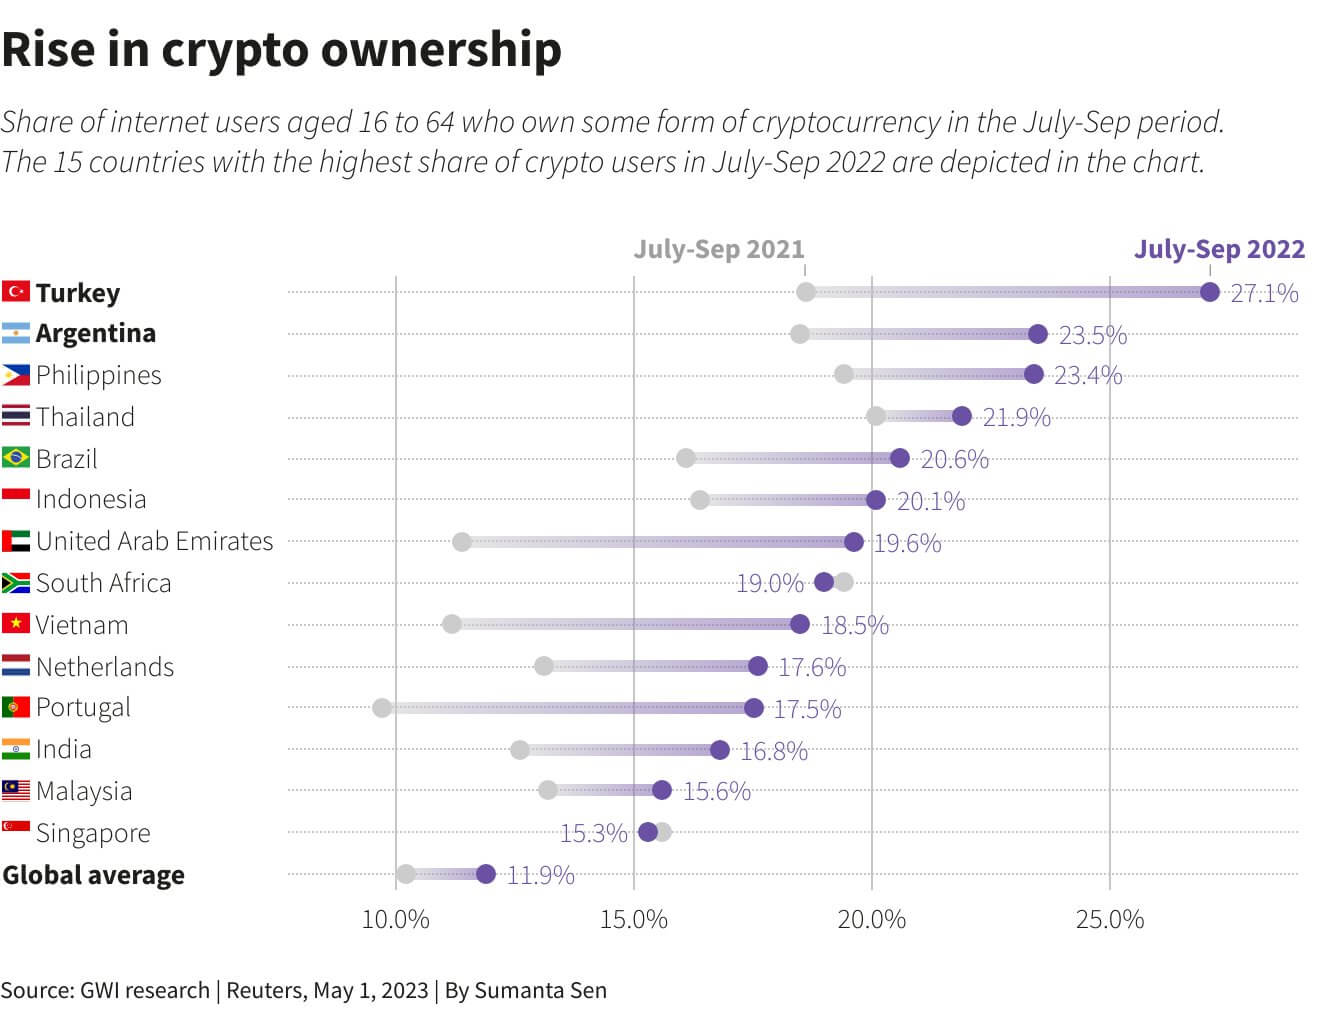 Crypto ownership in Turkey, Argentina and Philippines surges as inflation skyrockets